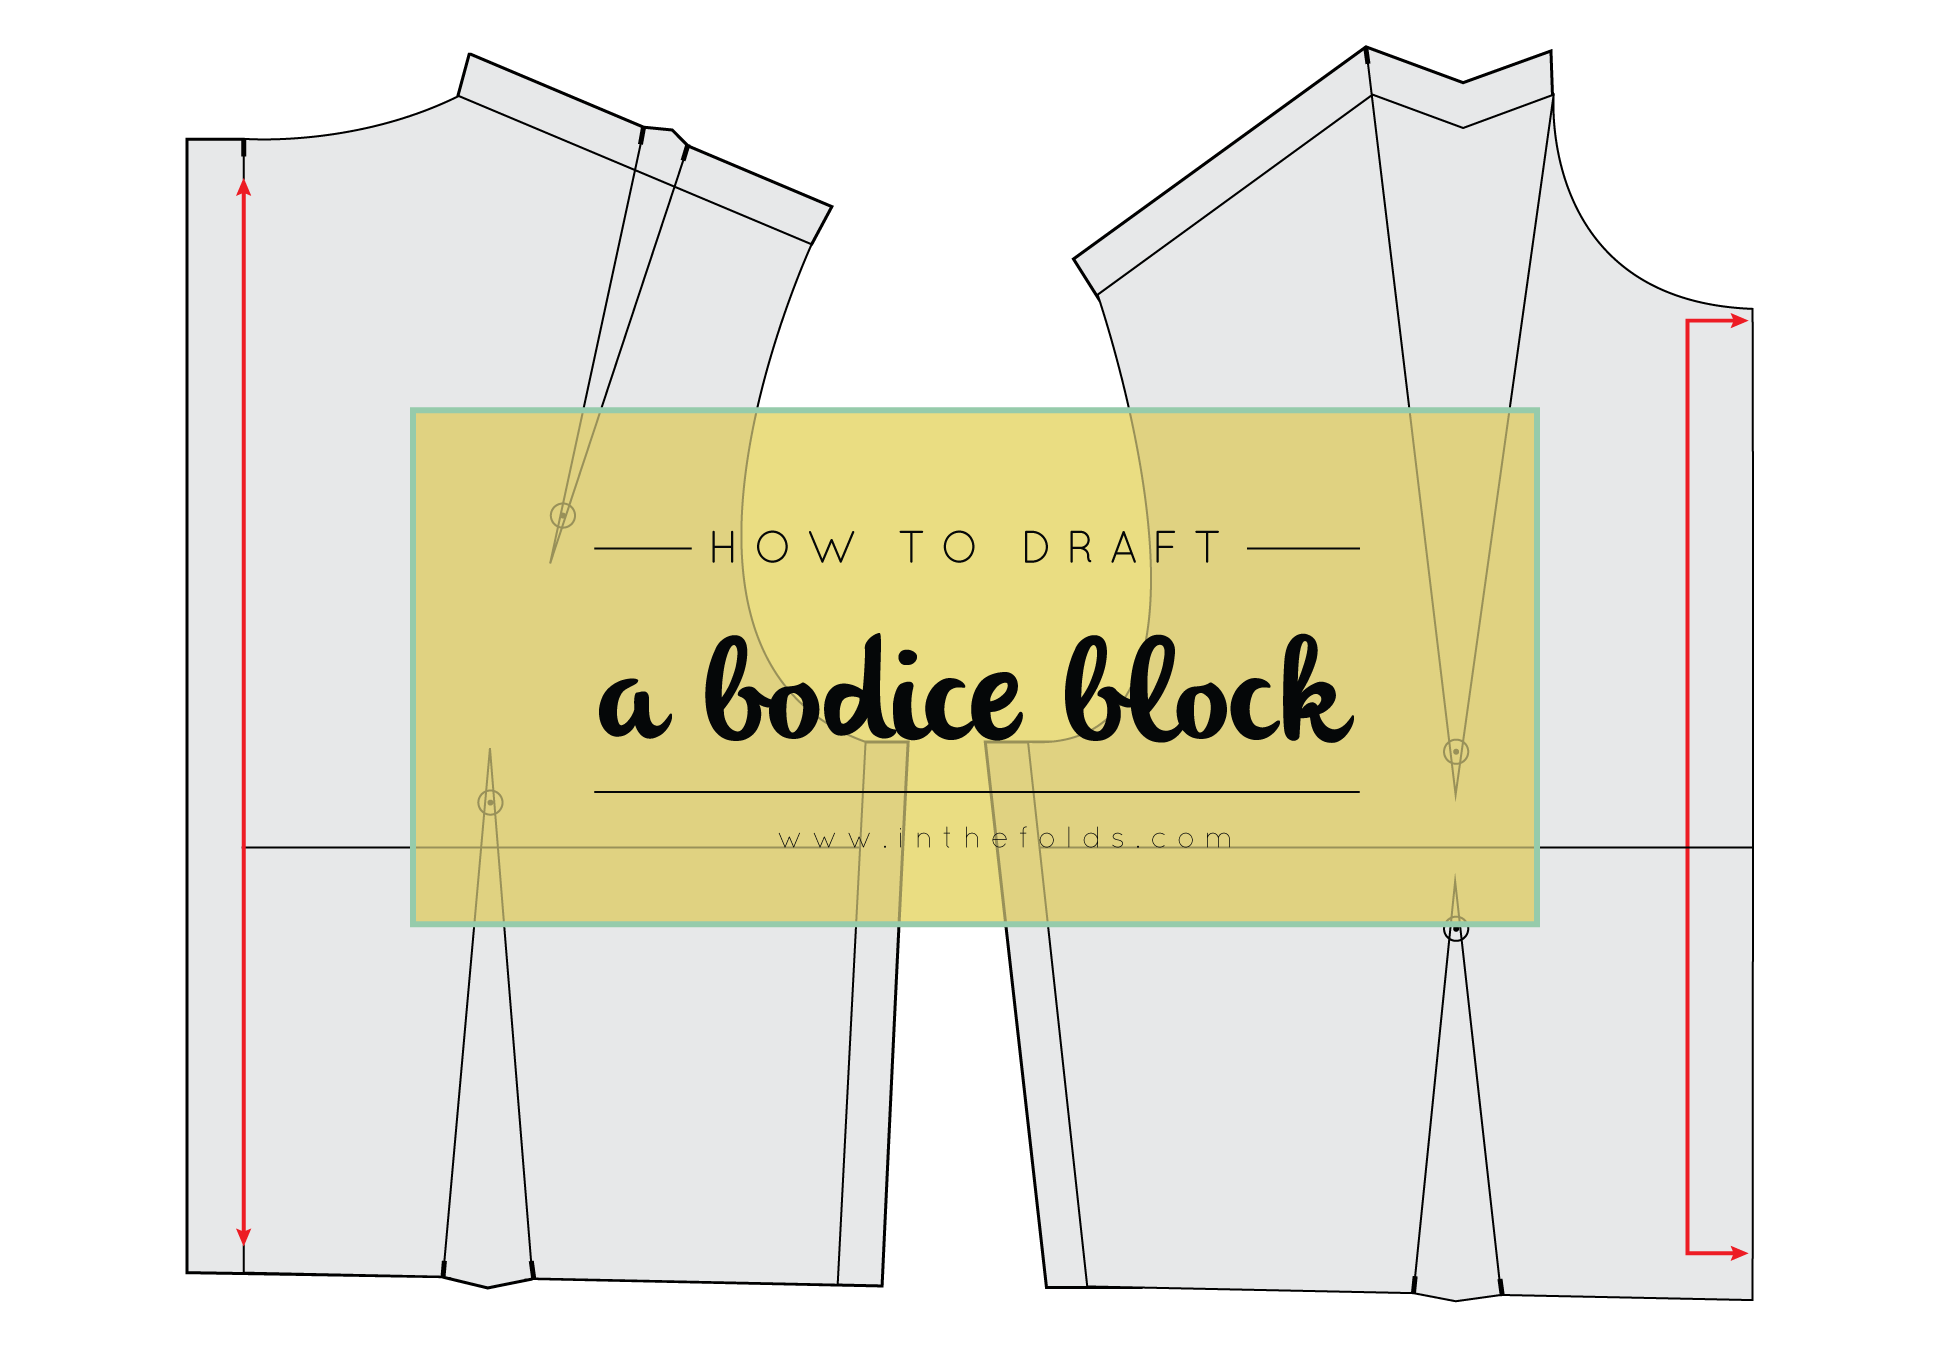 Basic Body Measurement Rules For Sewing